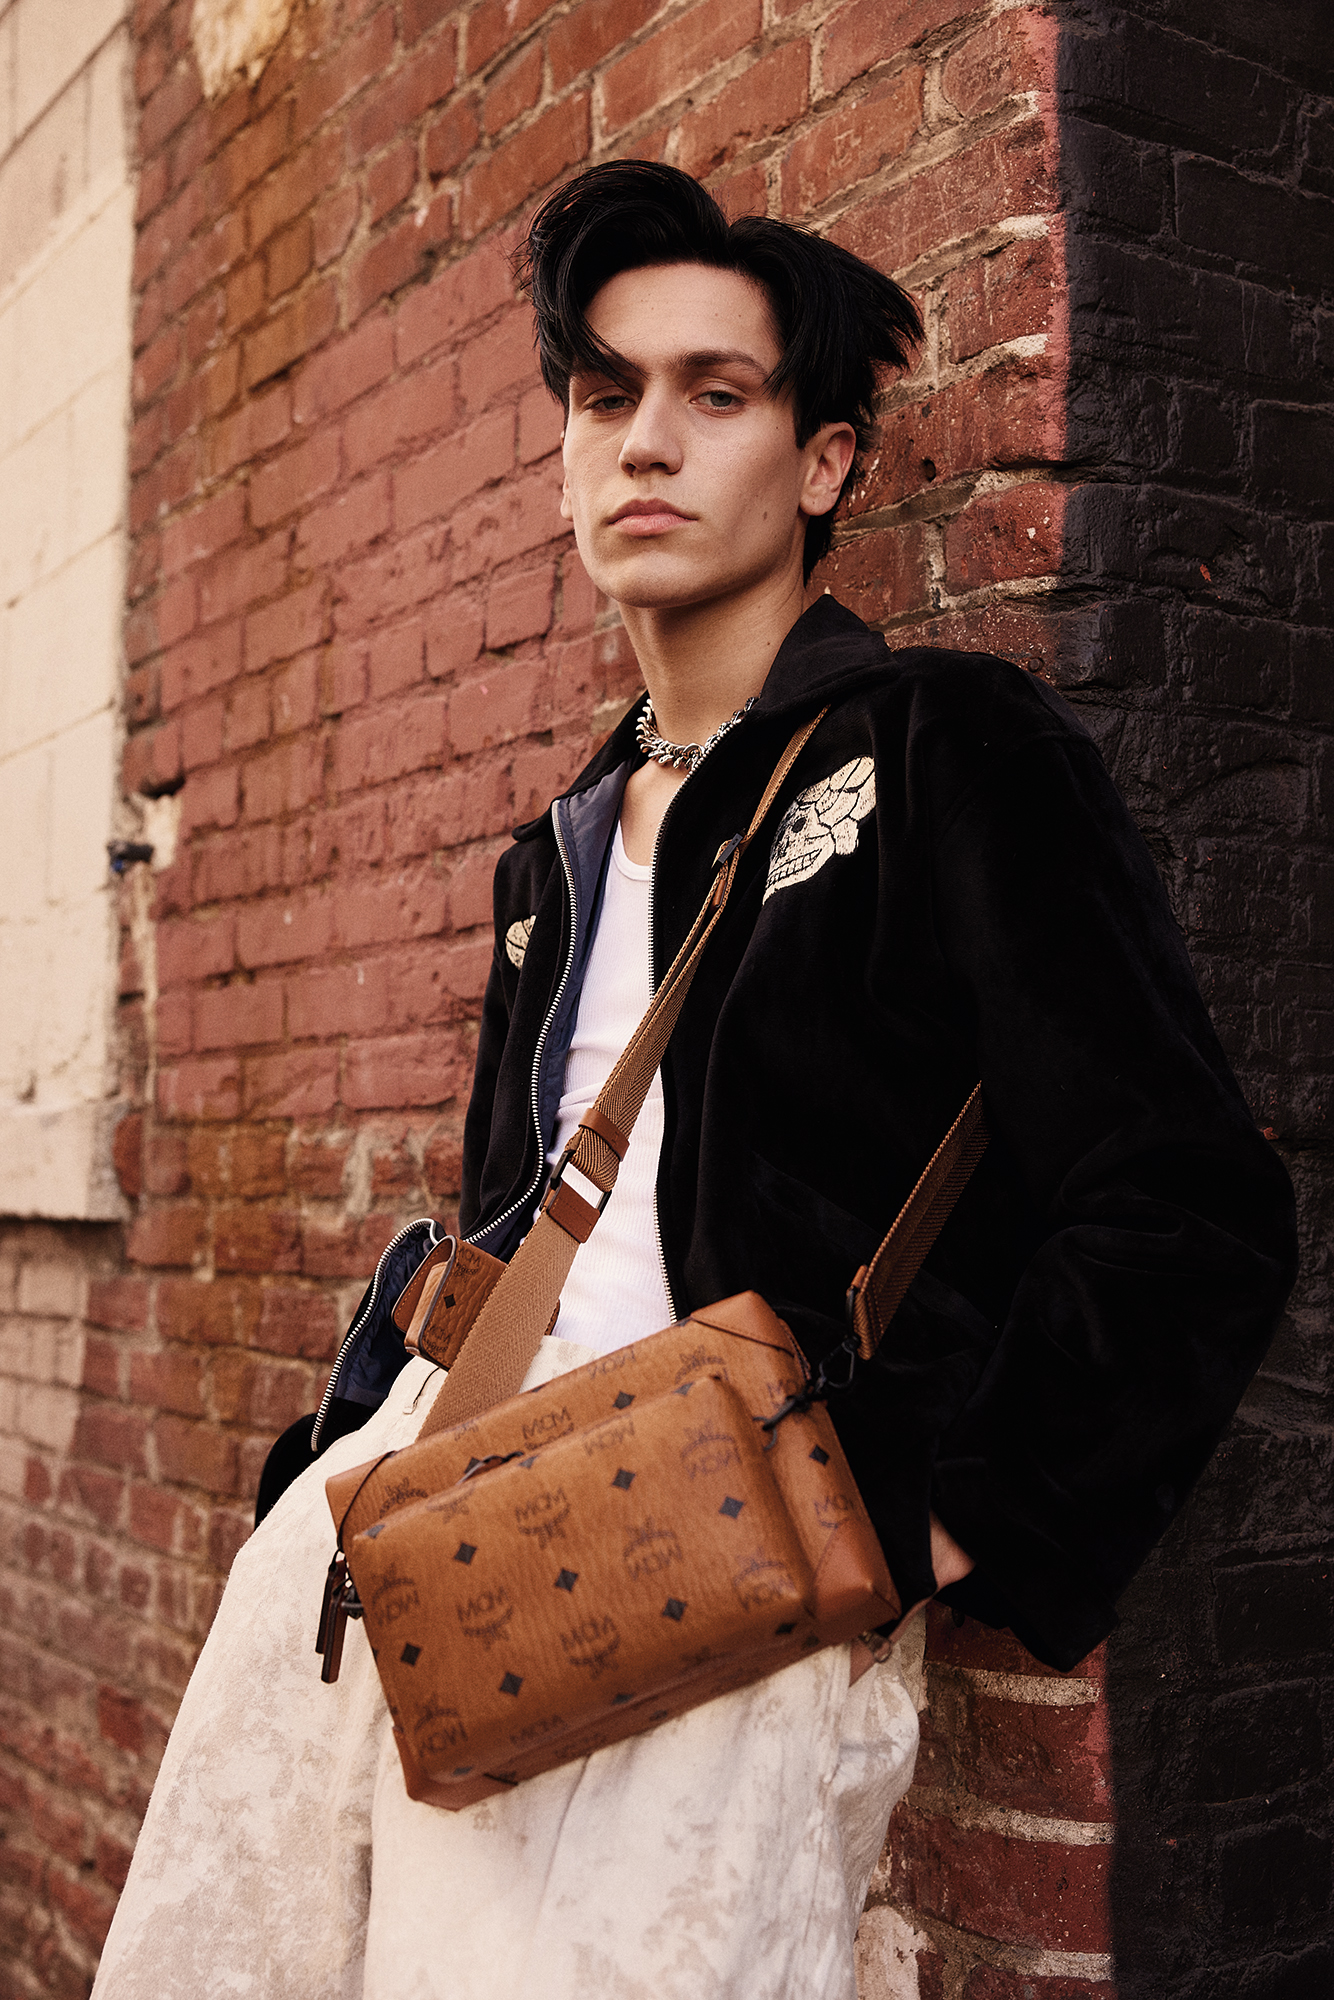  Huddy wears pants Our Legacy Bag MCM Jacket vintage, stylist’s own Tank top stylist’s own Jewelry his own On hair OUAI Matte Pomade